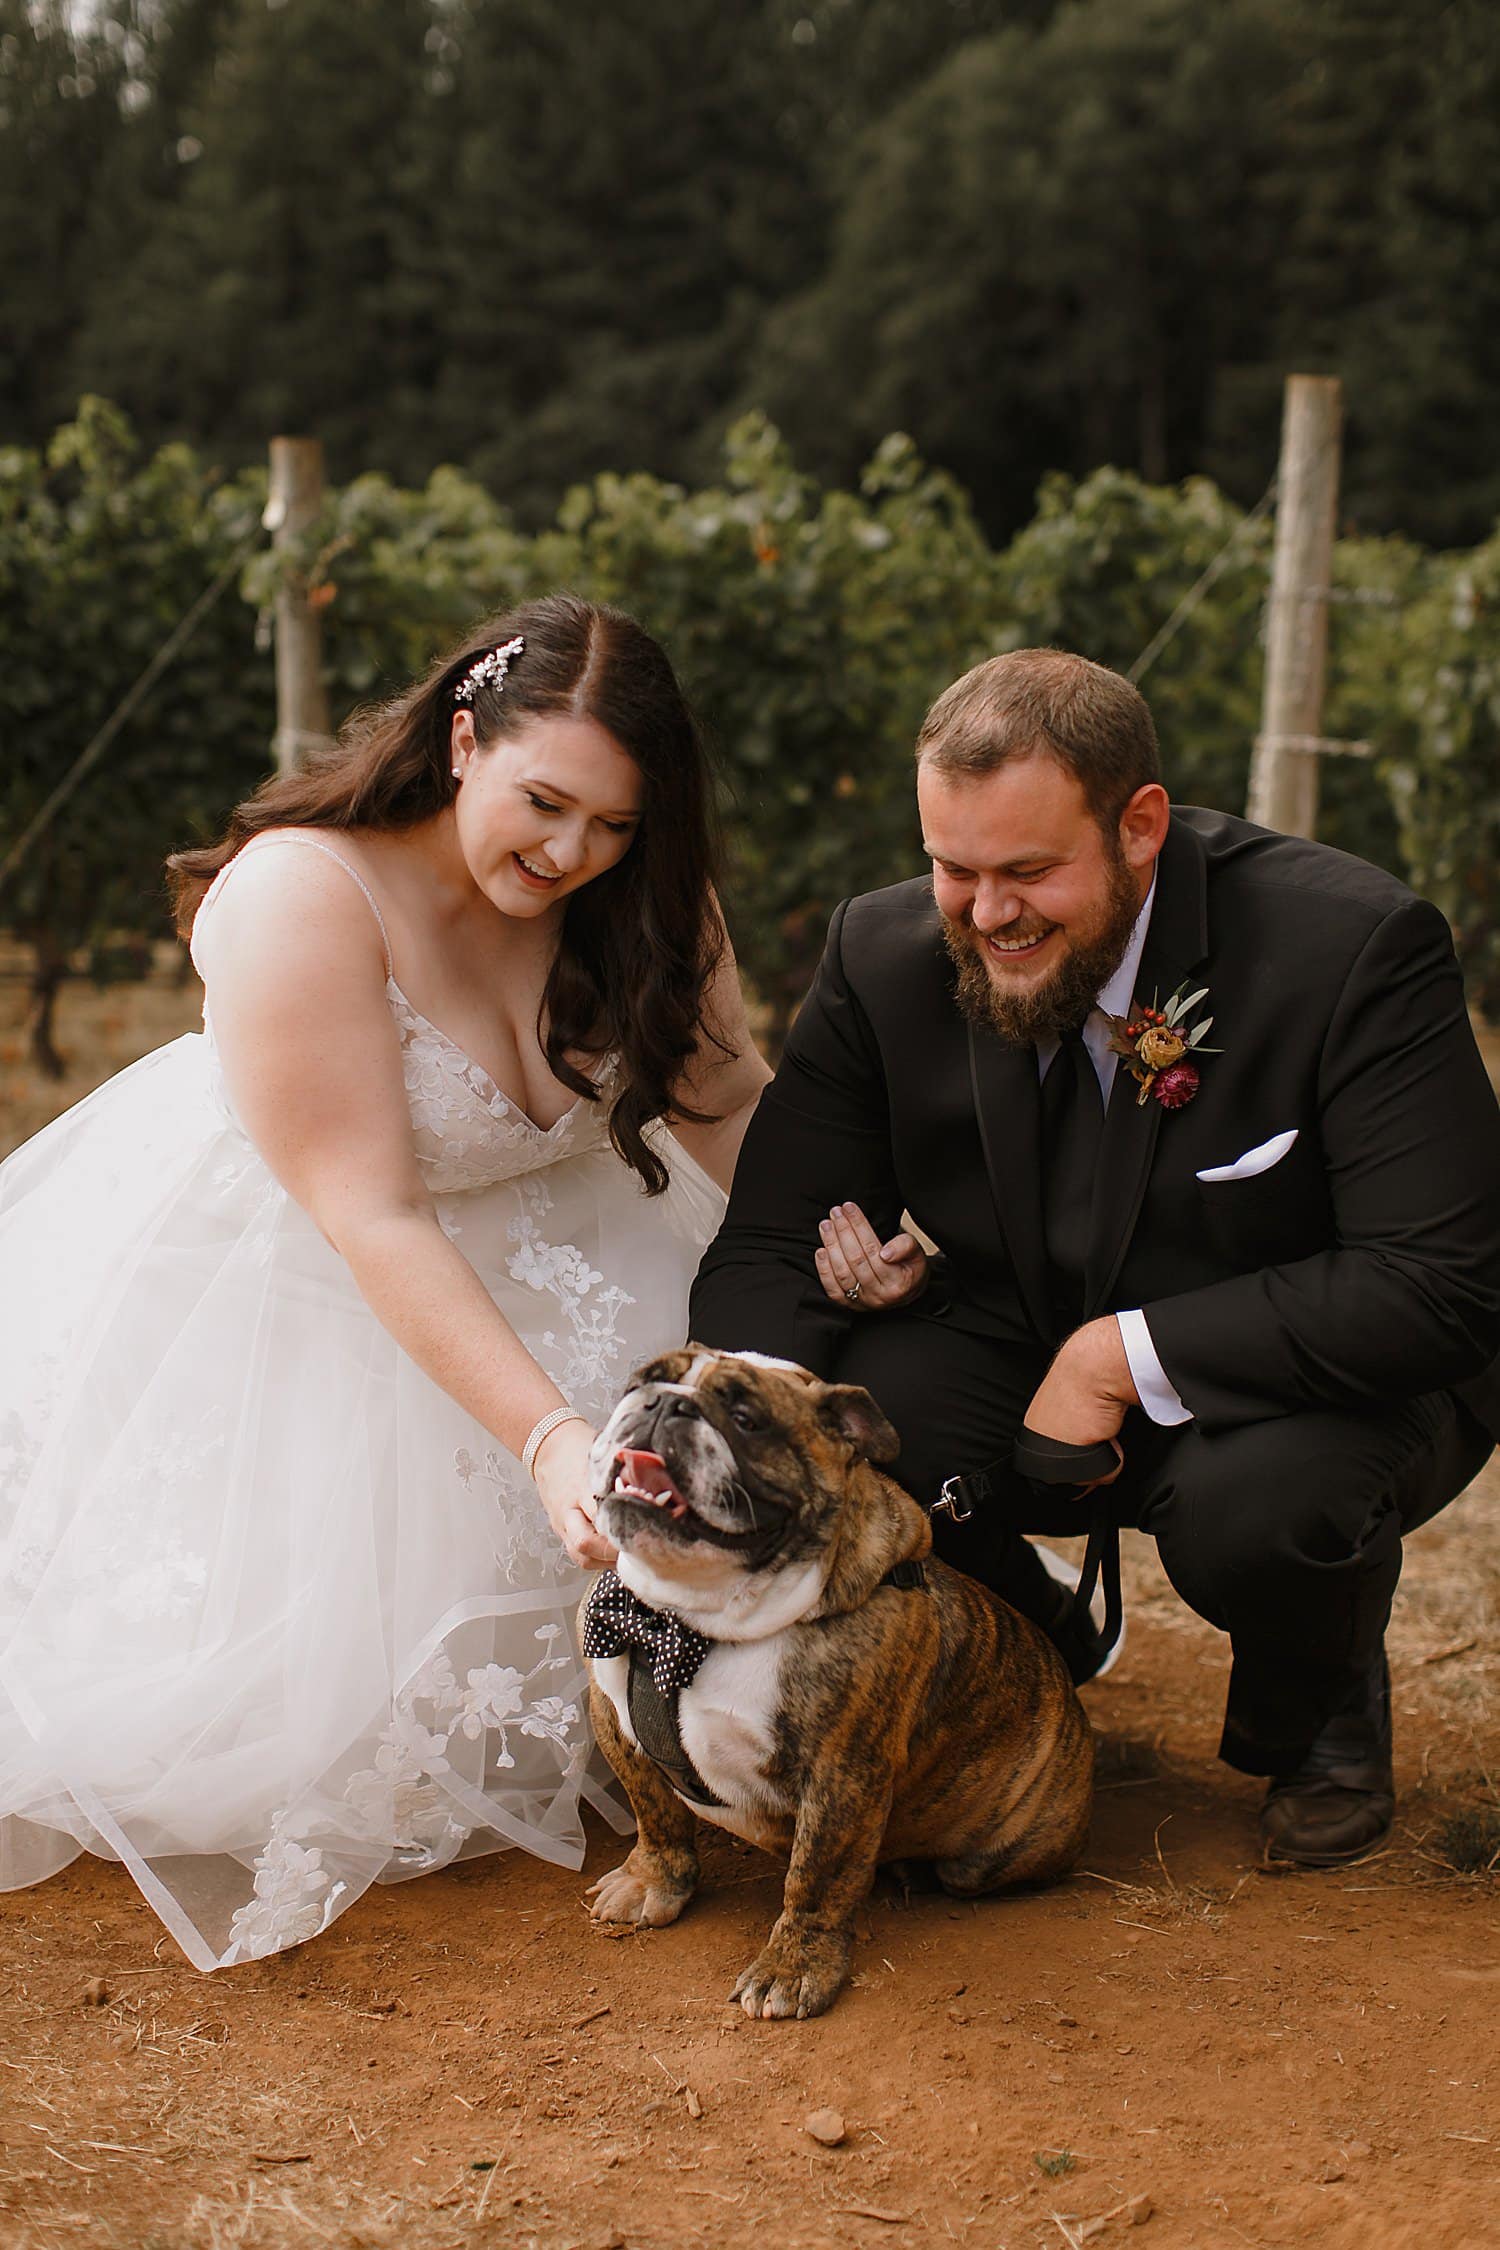 A bride and groom poses with their dog at their Domaine de Broglie wedding.